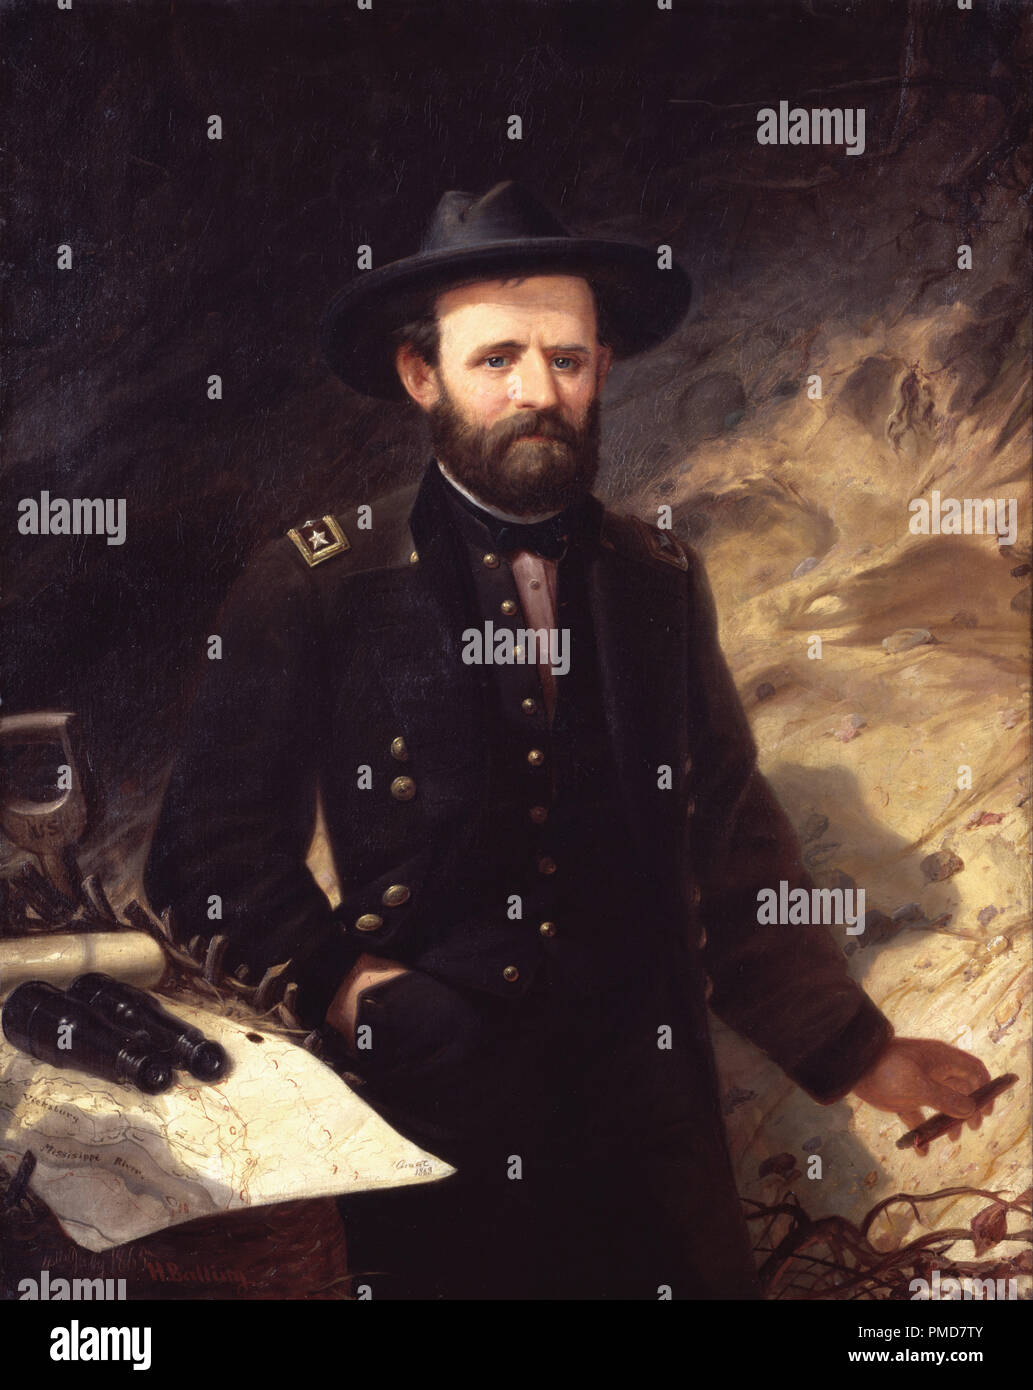 Ulysses S. Grant. Date/Period: 1865. Painting. Oil on canvas. Height: 1,203 mm (47.36 in); Width: 946 mm (37.24 in). Author: OLE PETER HANSEN BALLING. Stock Photo